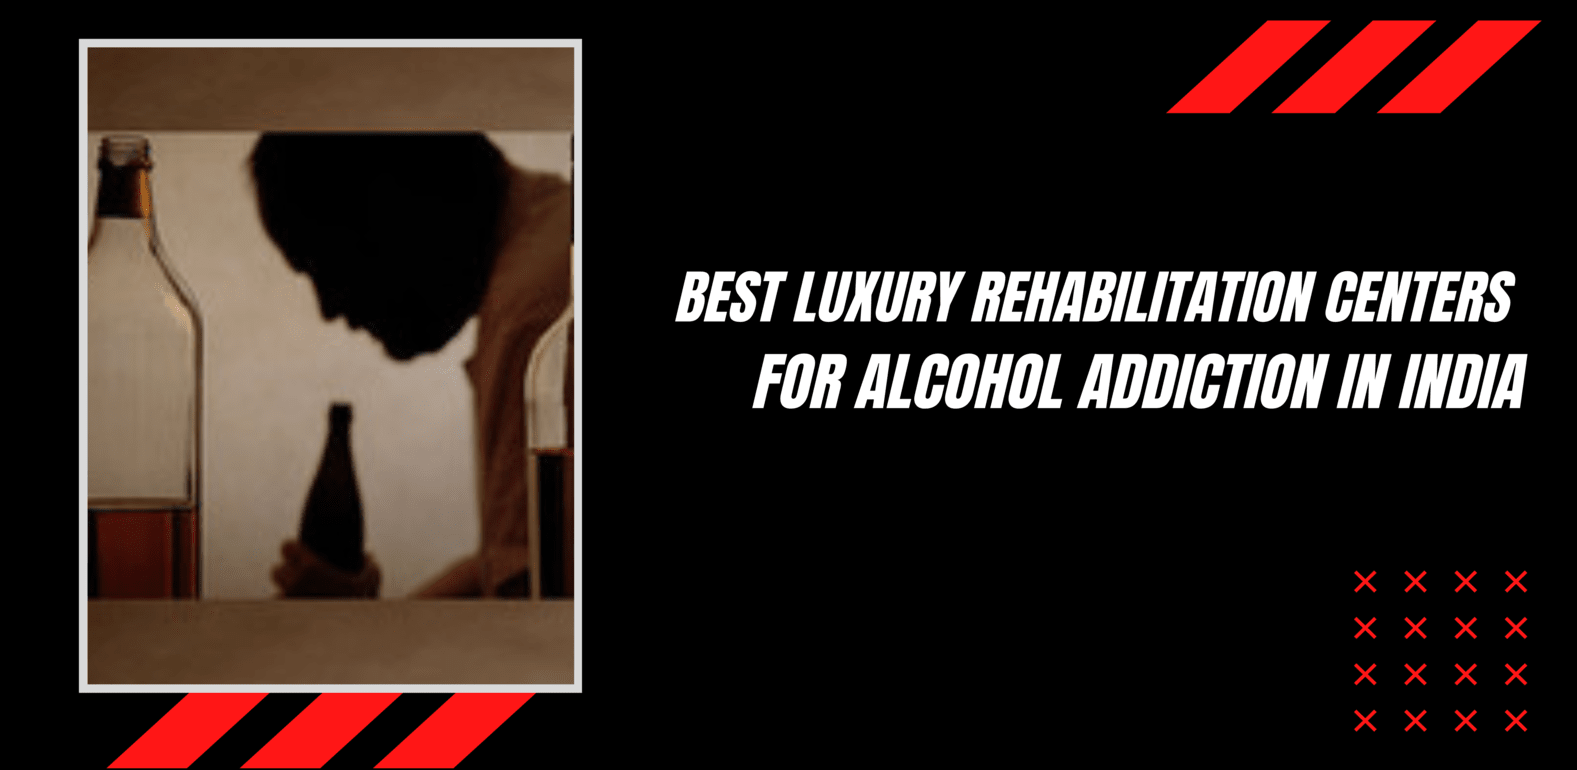 Opulence in Recovery: Best Luxury Rehabilitation Centers for Alcohol Addiction in India